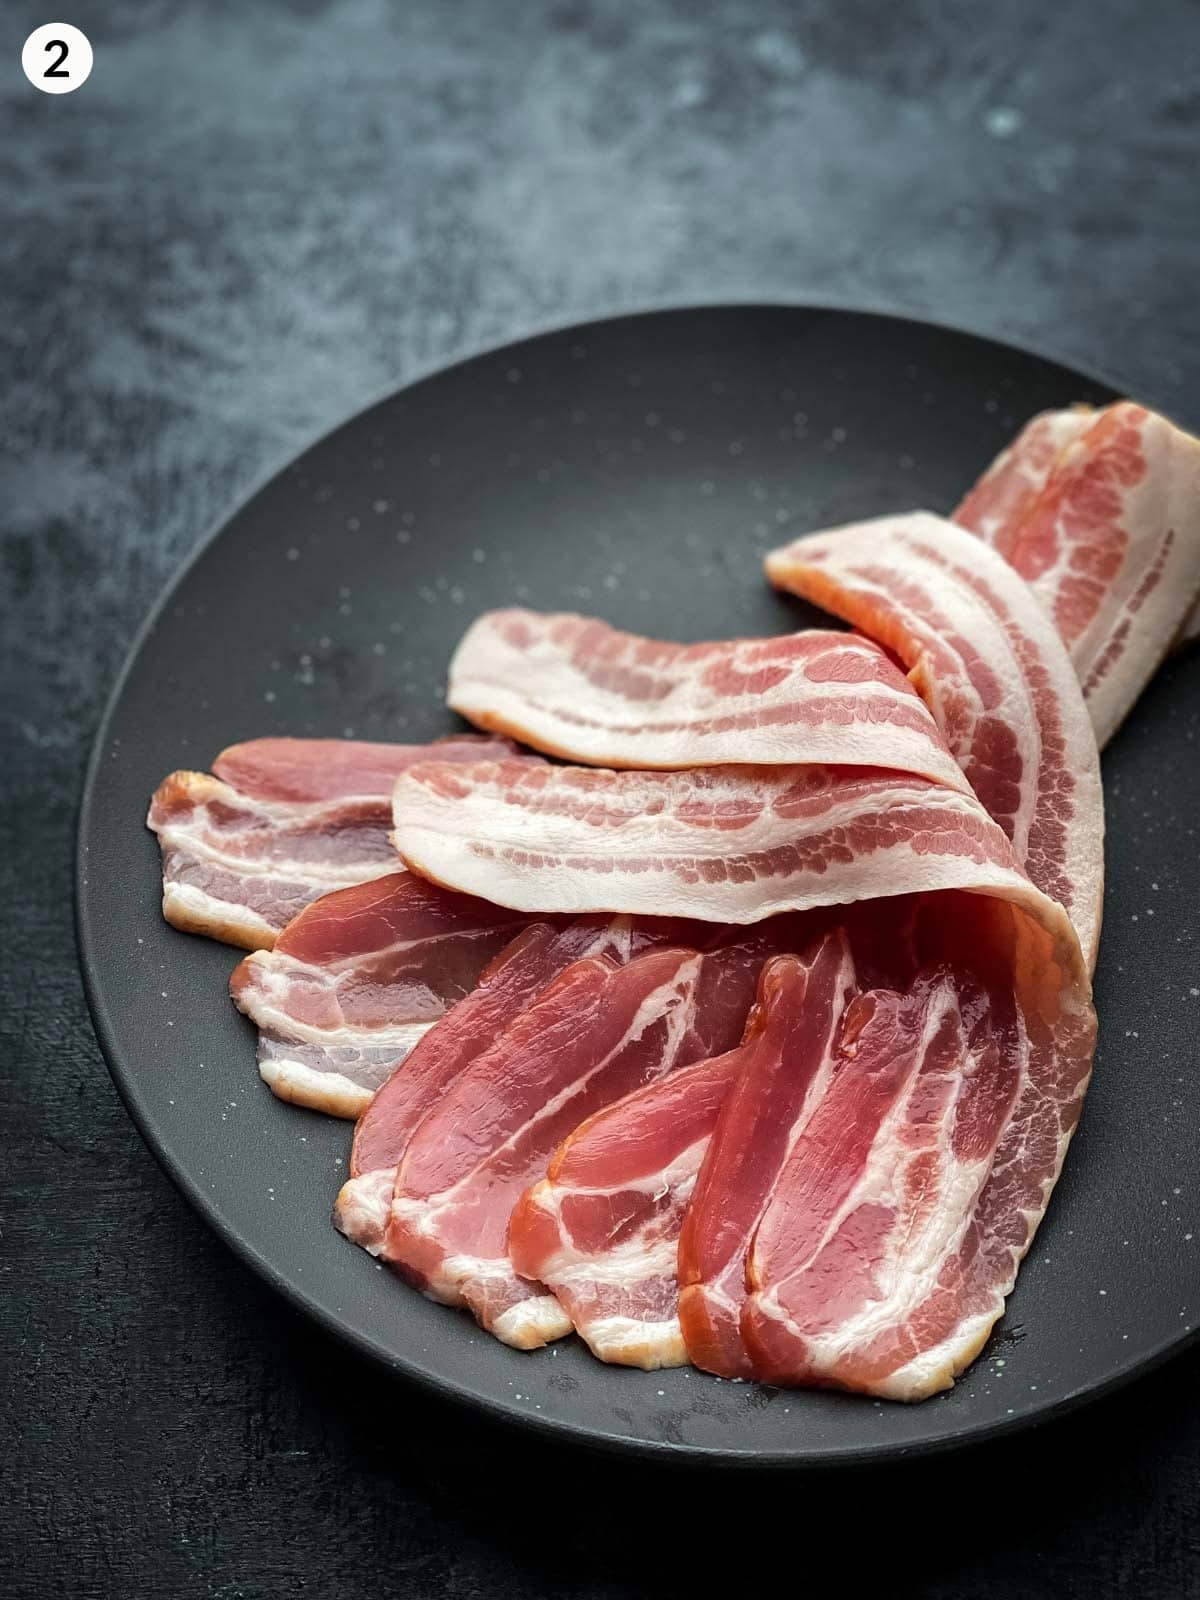 Streaky bacon on a black plate